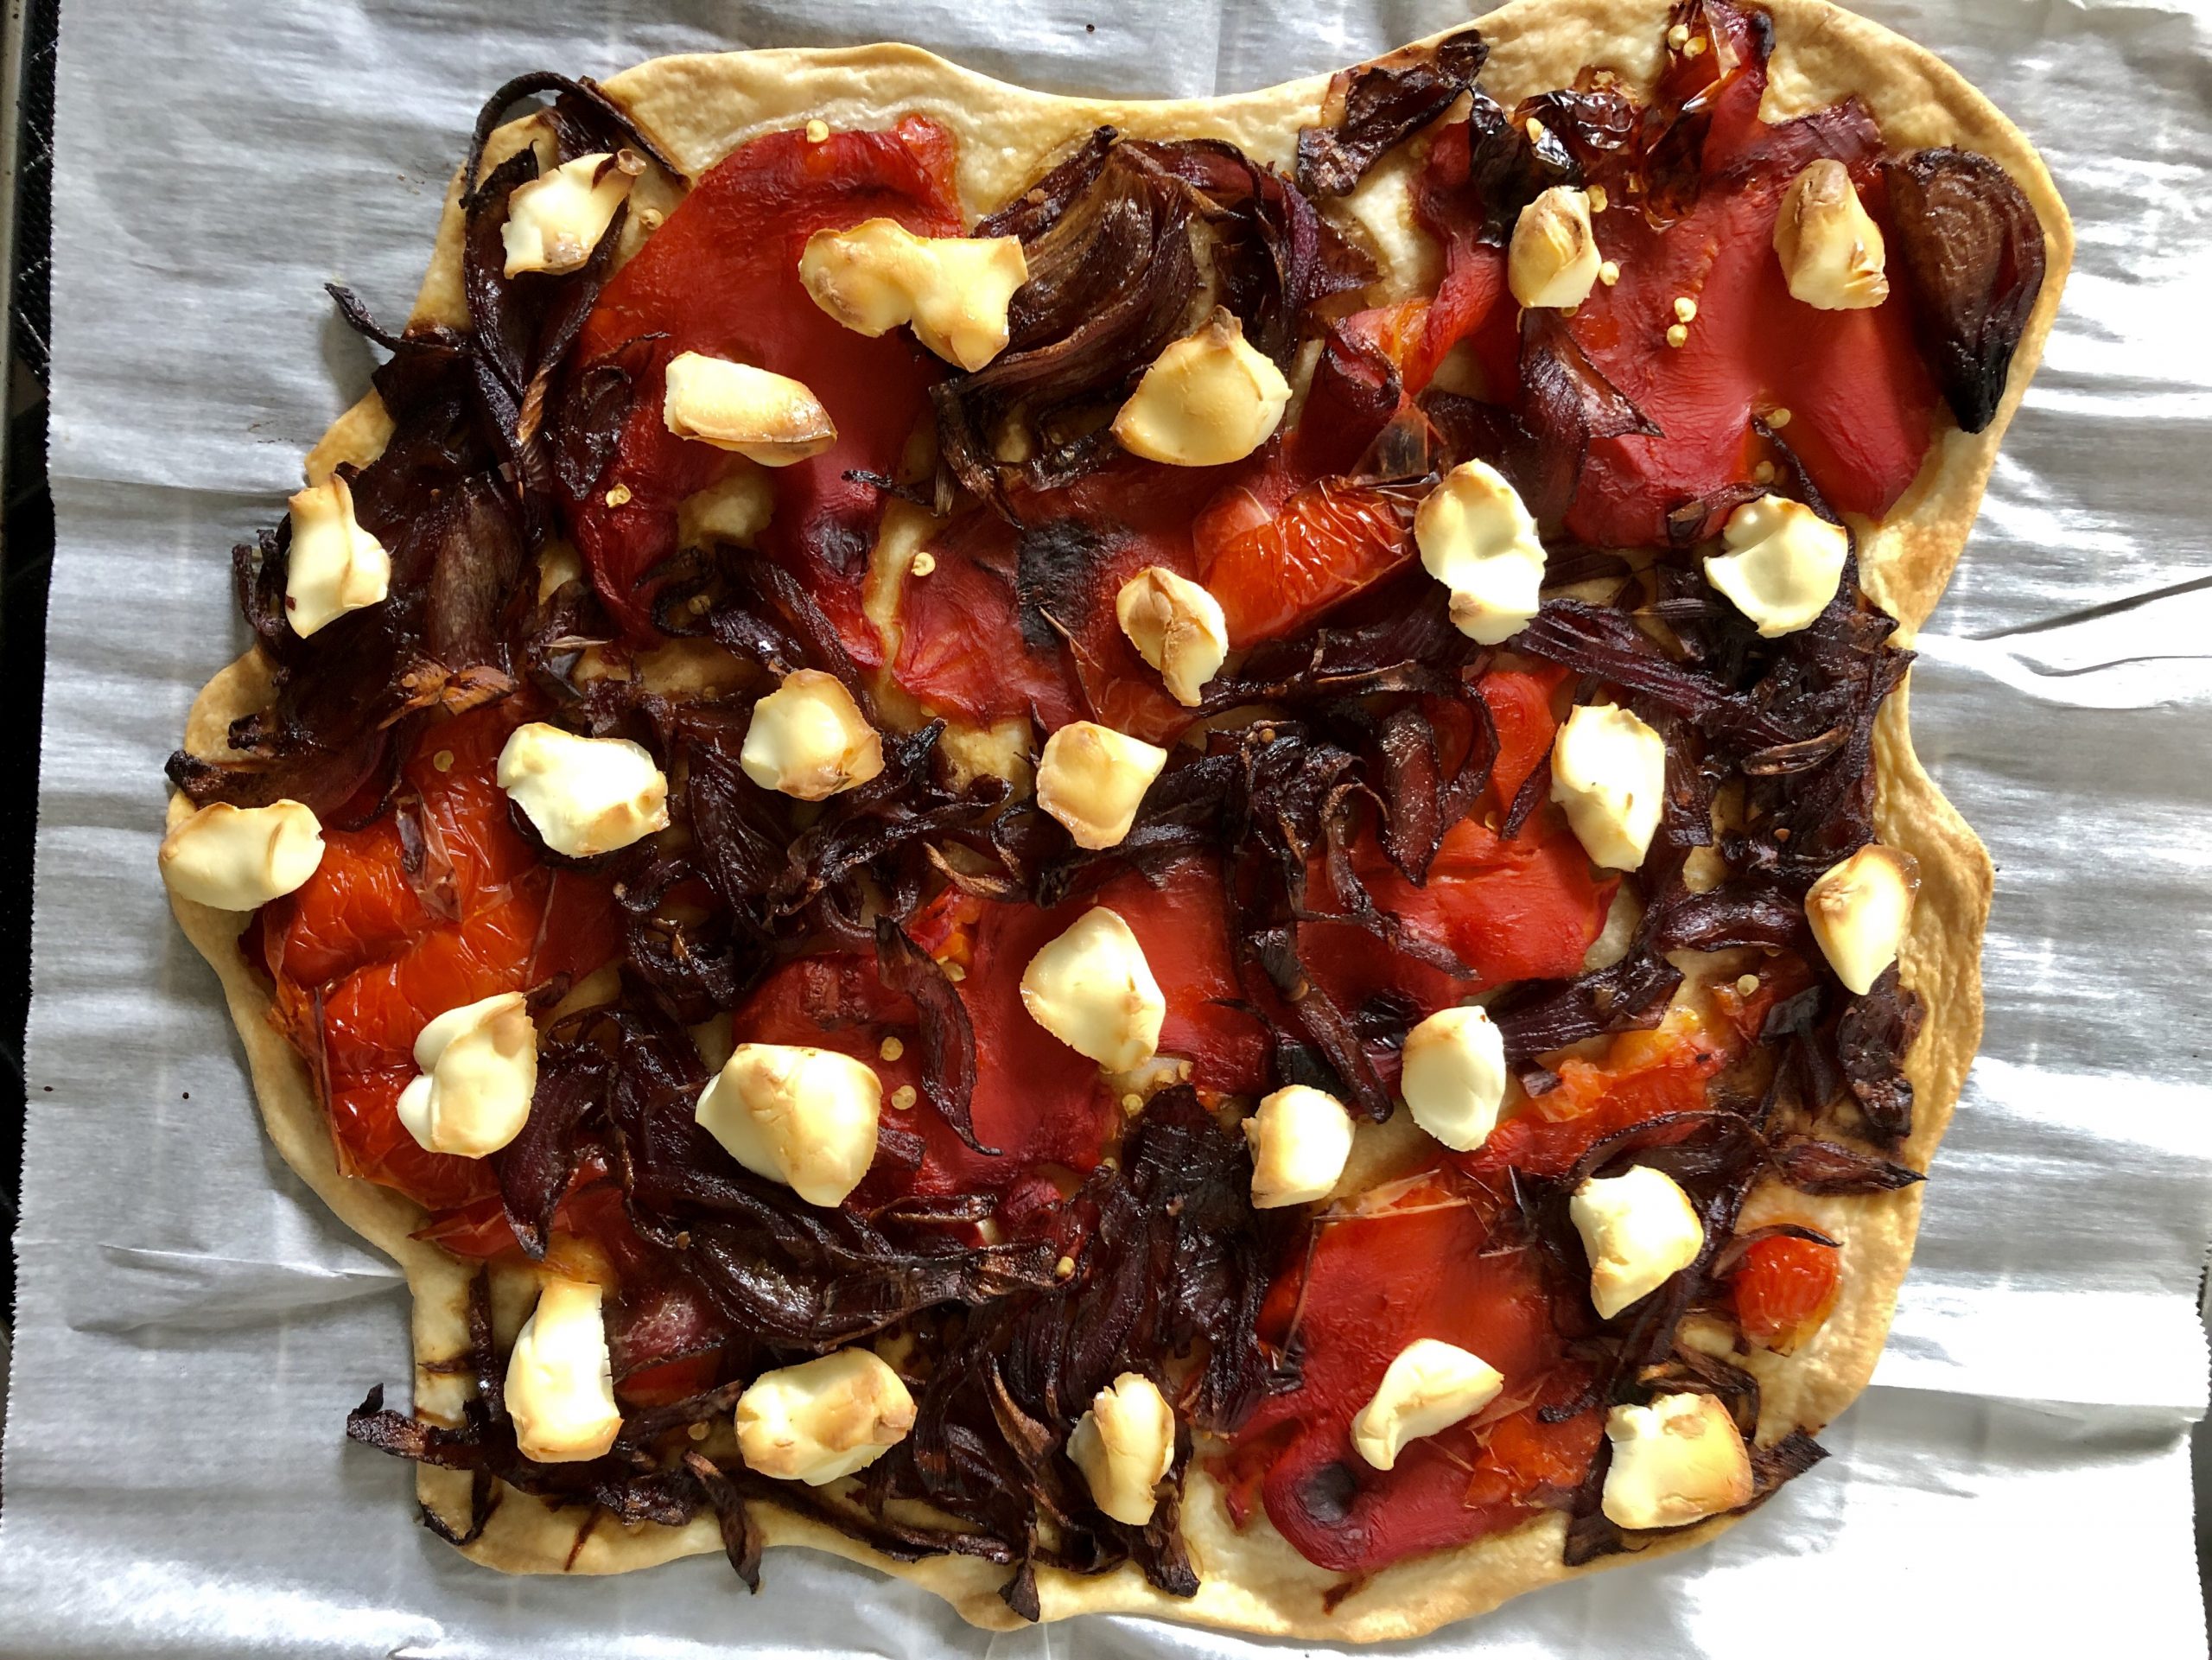 Galette with roasted red peppers, caramelized onions and goat cheese